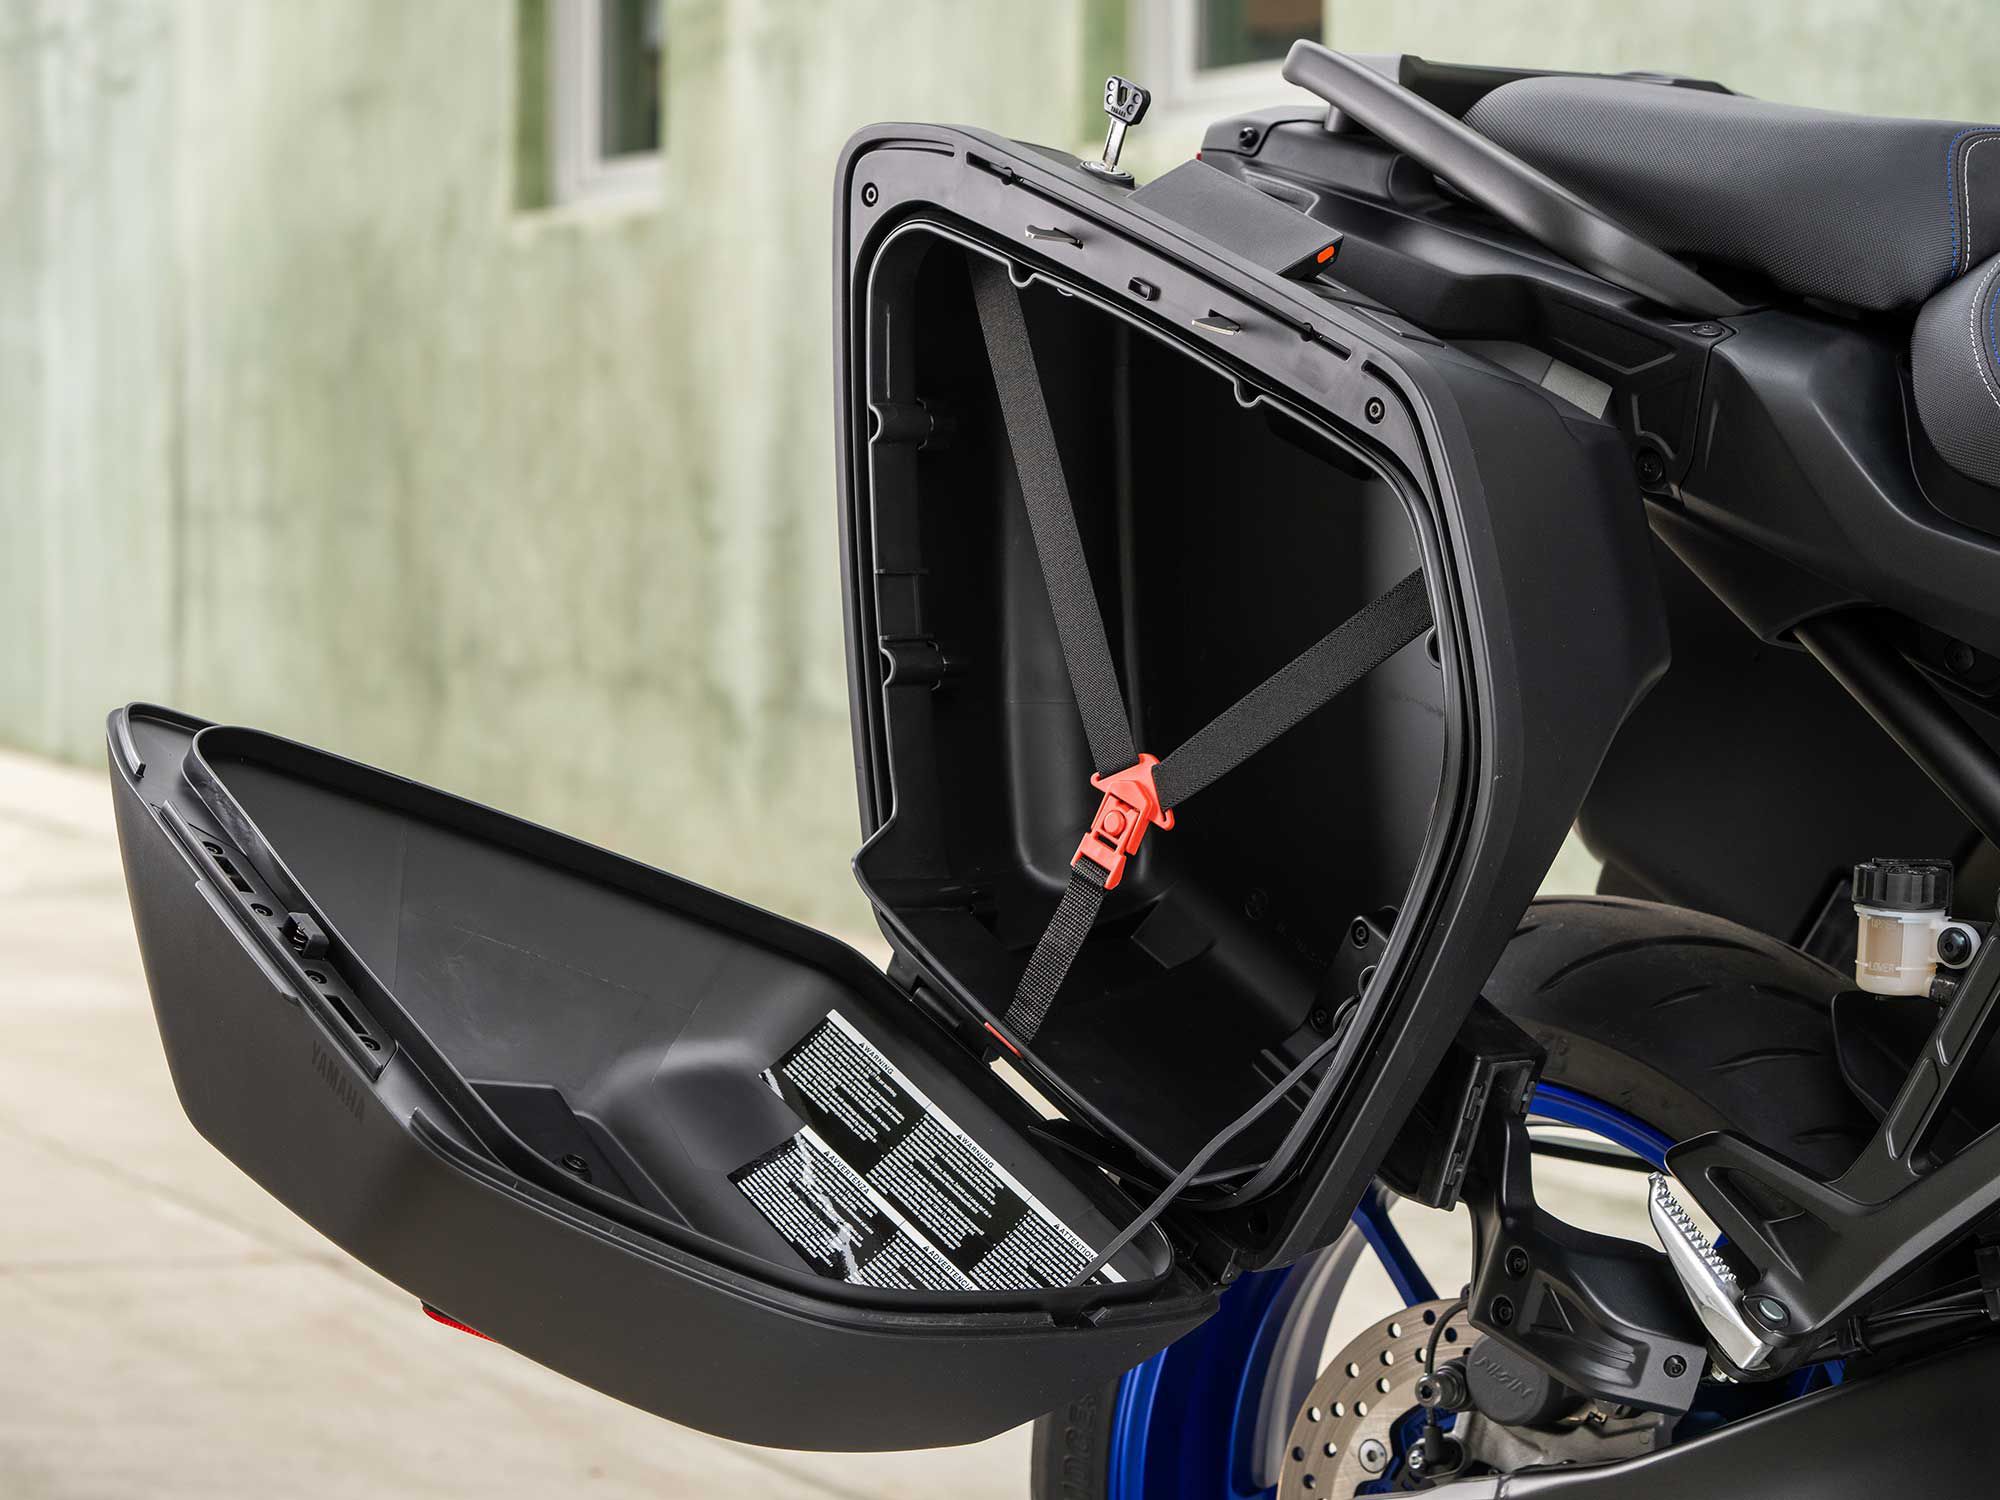 Lockable and removable hard case luggage is standard on every Tracer 9 GT. The cases can swallow nearly 8 gallons of gear.